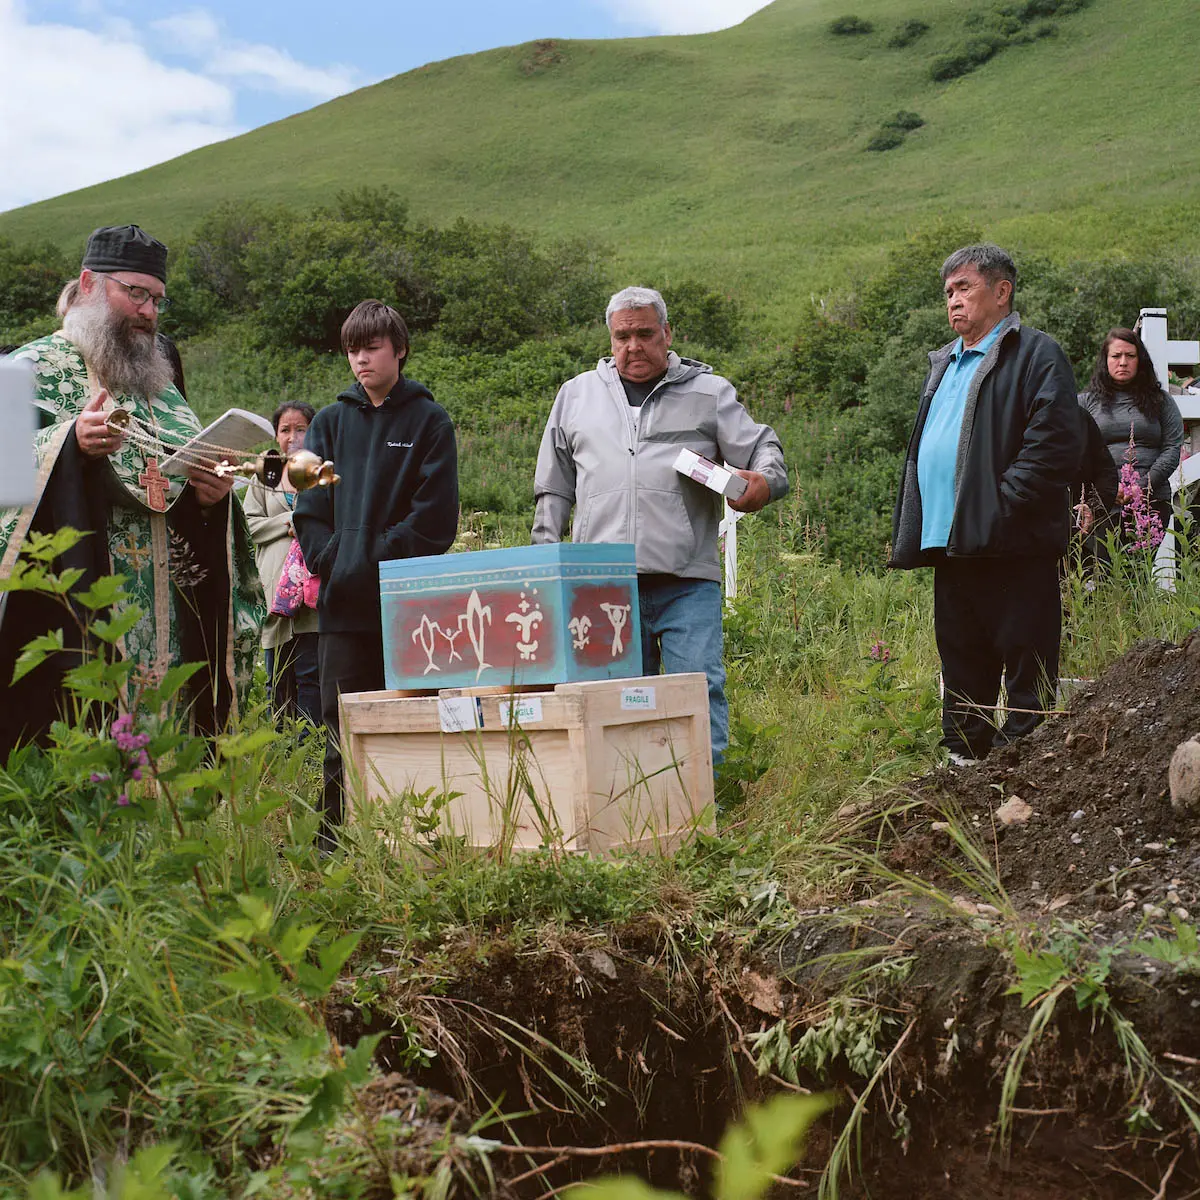 A priest reads over Anastasia's remains at a hillside burial site before she is interred.